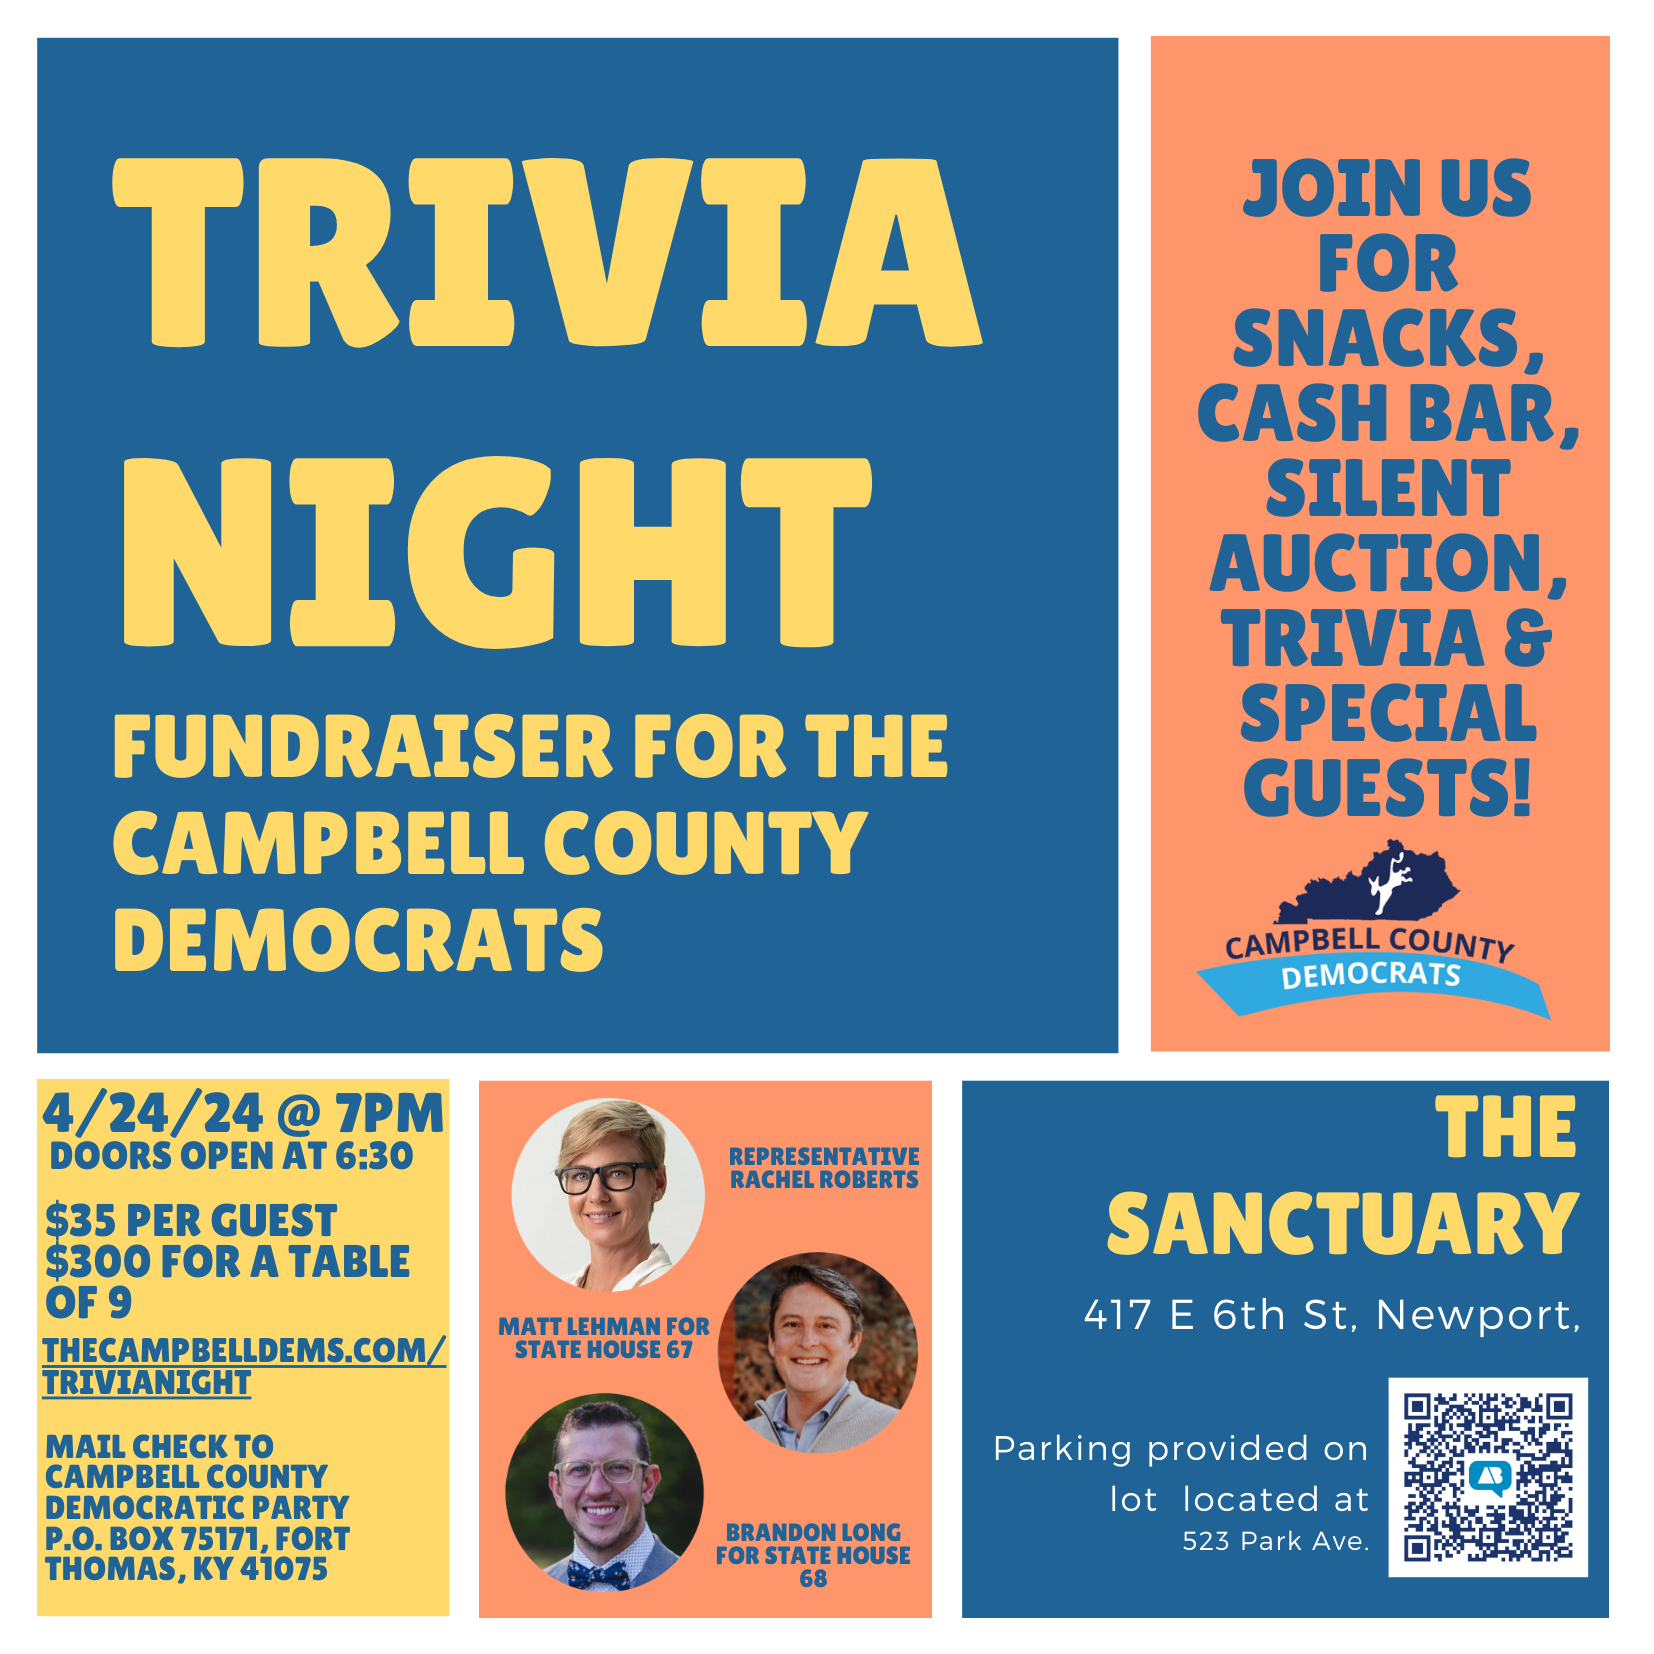 Trivia night flyer with QR code to link